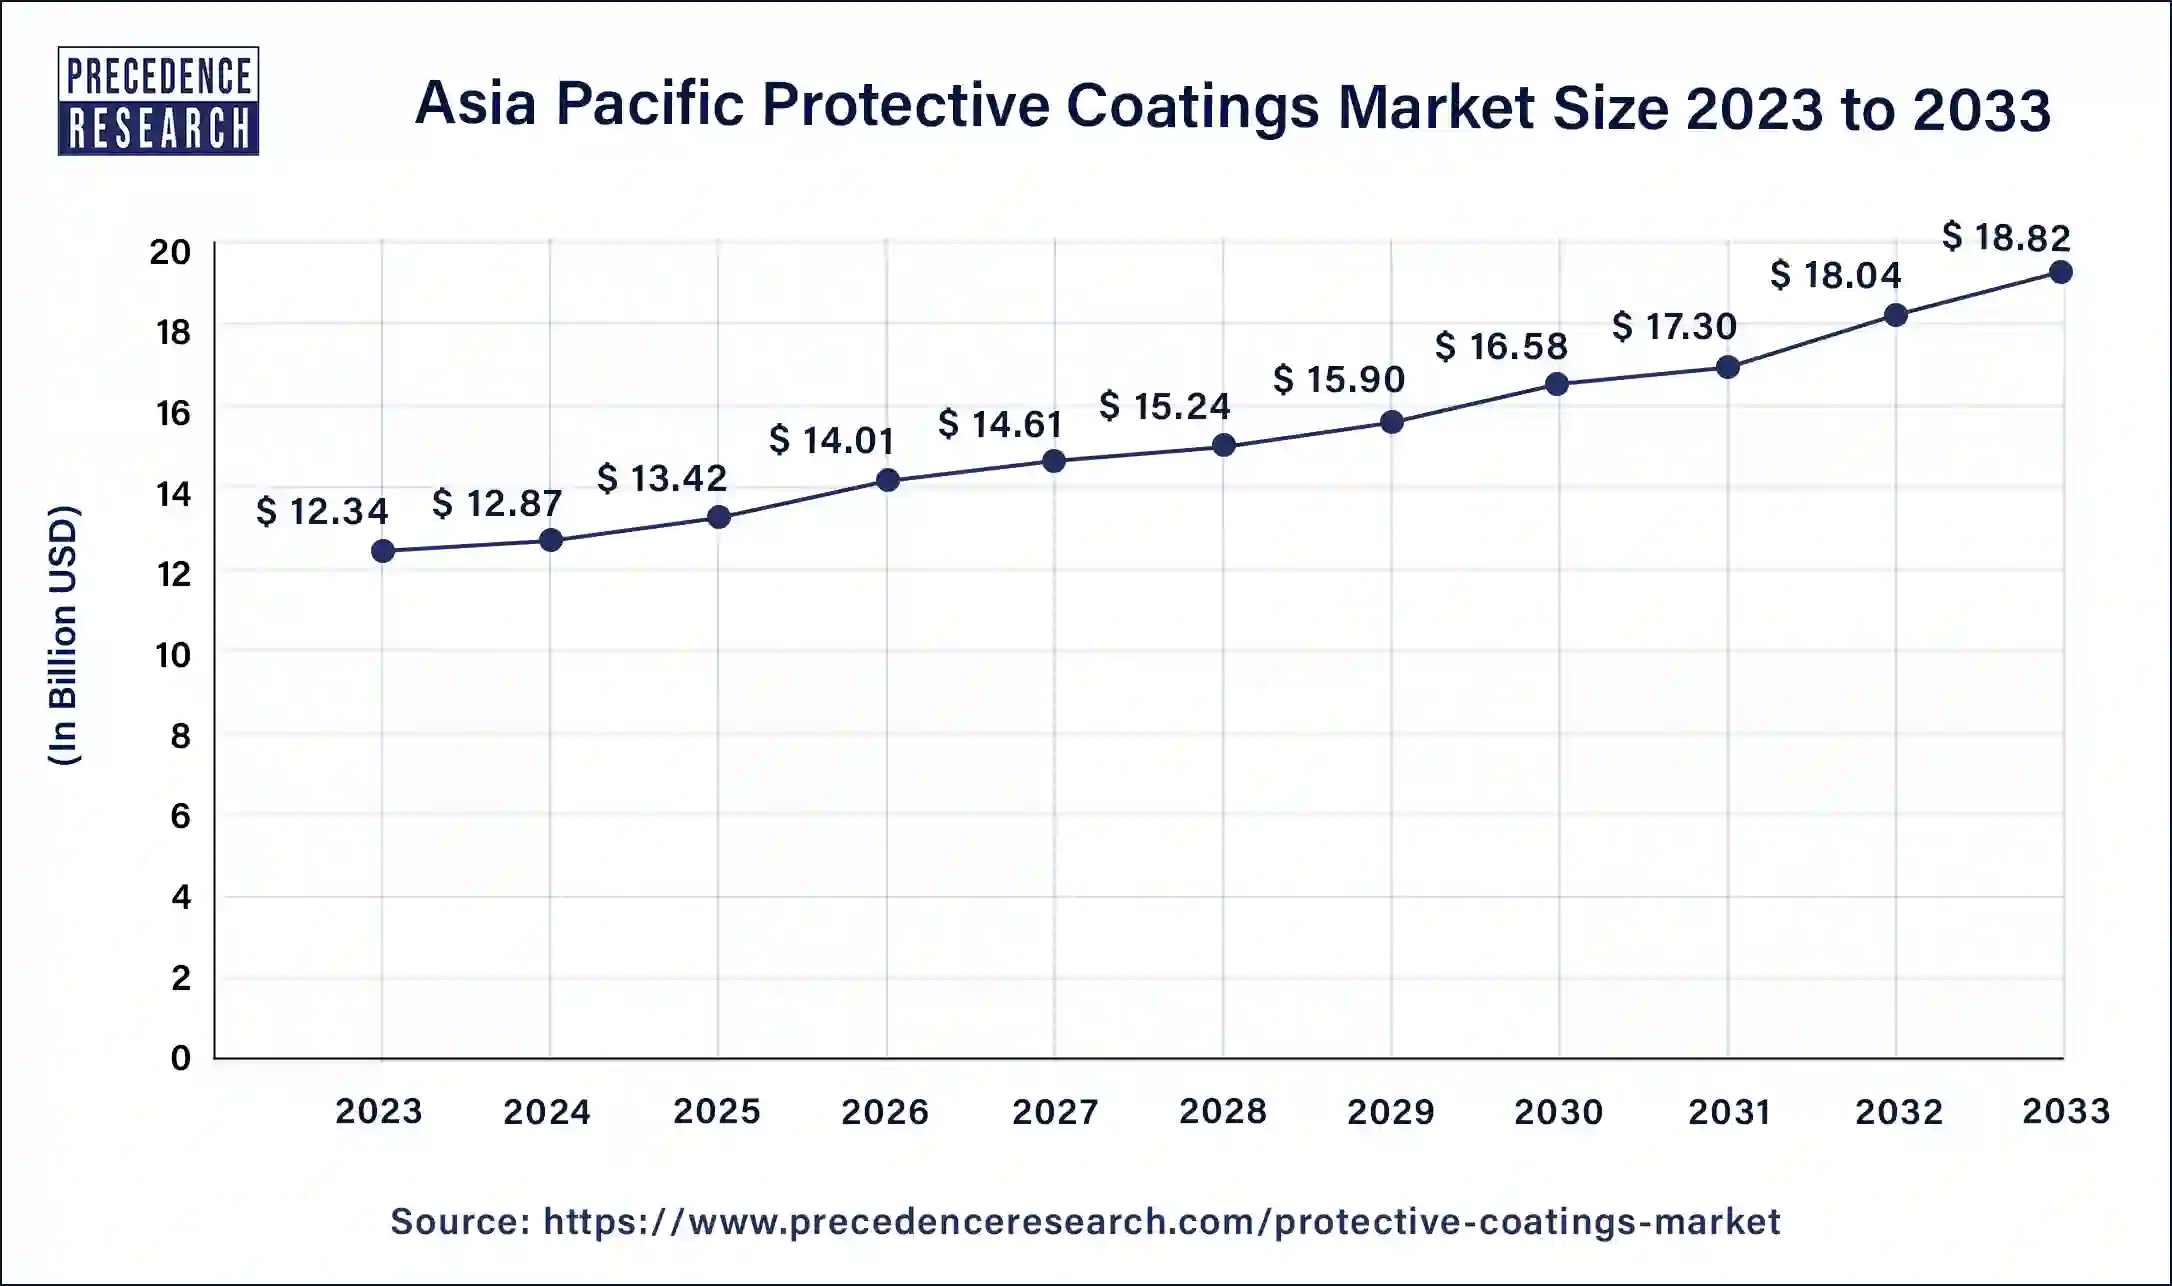 Asia Pacific Protective Coatings Market Size 2024 to 2033